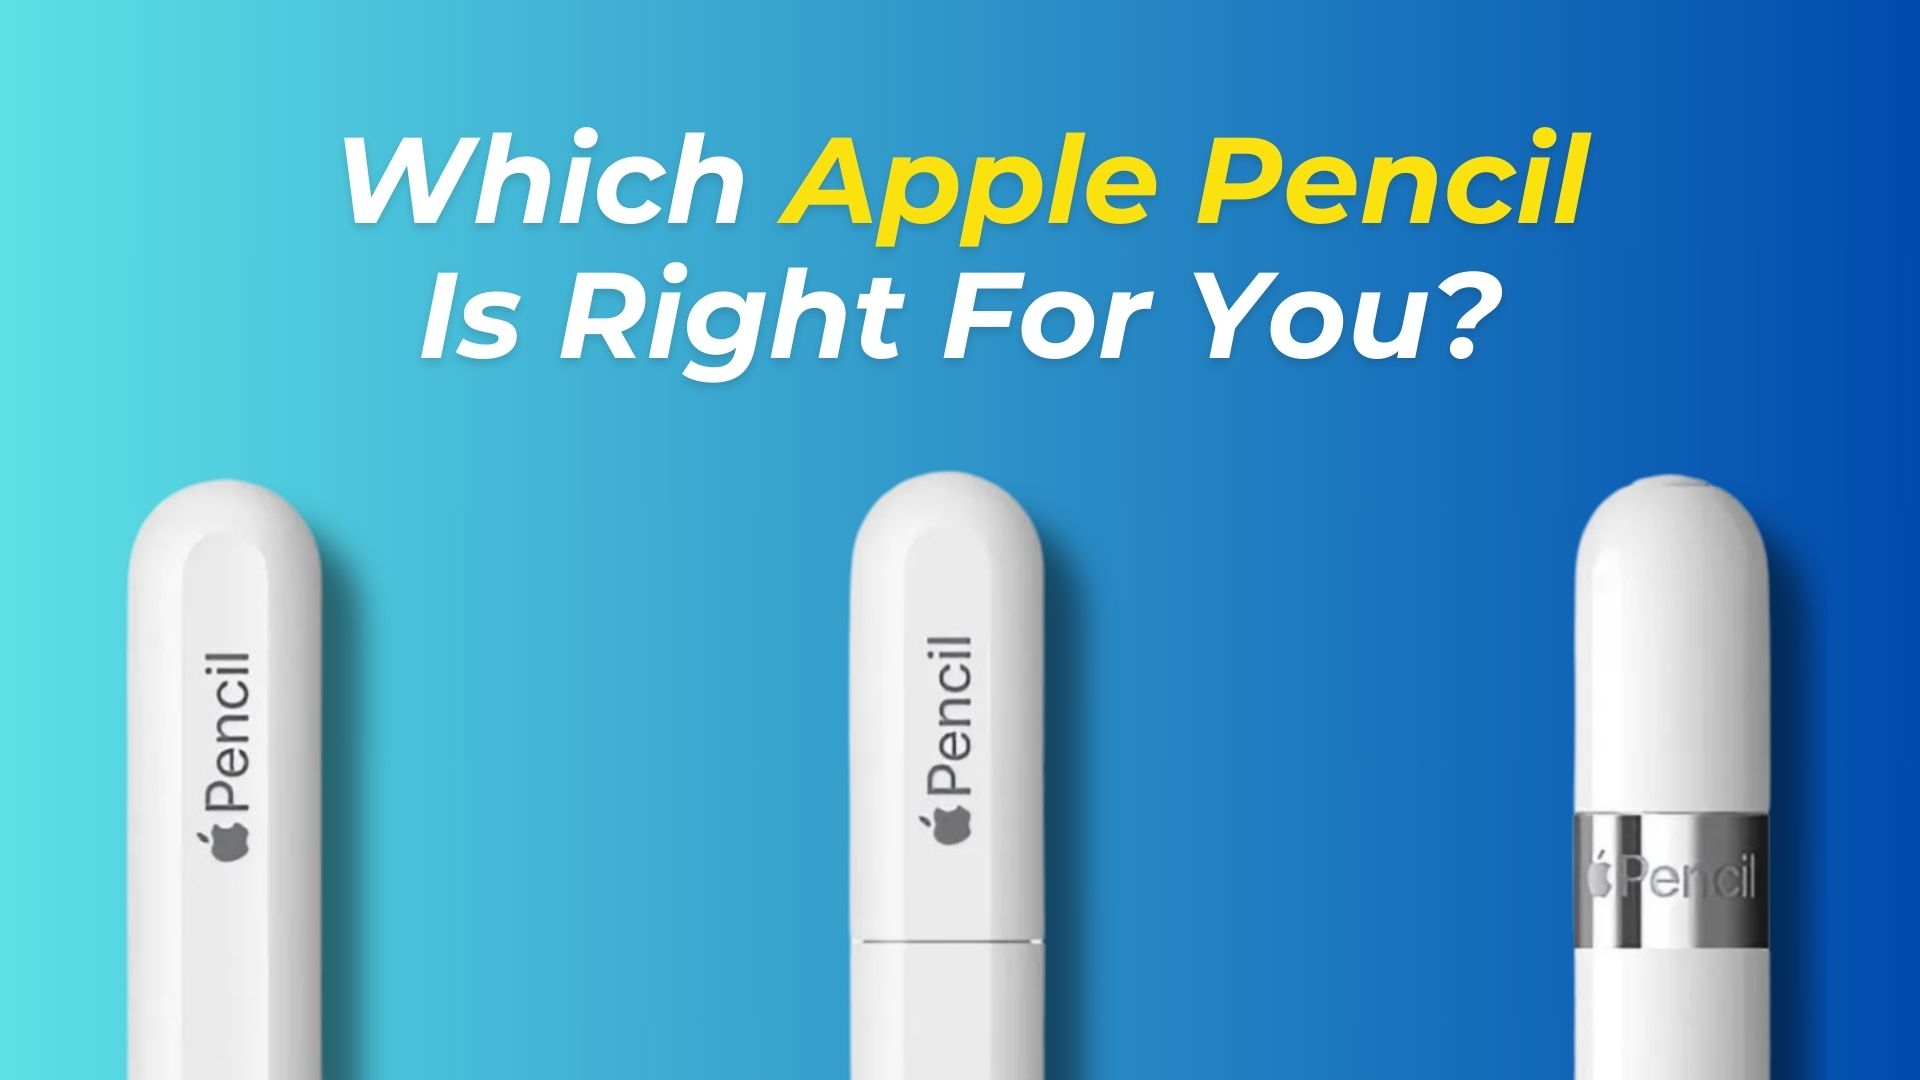 How to Choose the Right Apple Pencil for Your iPad